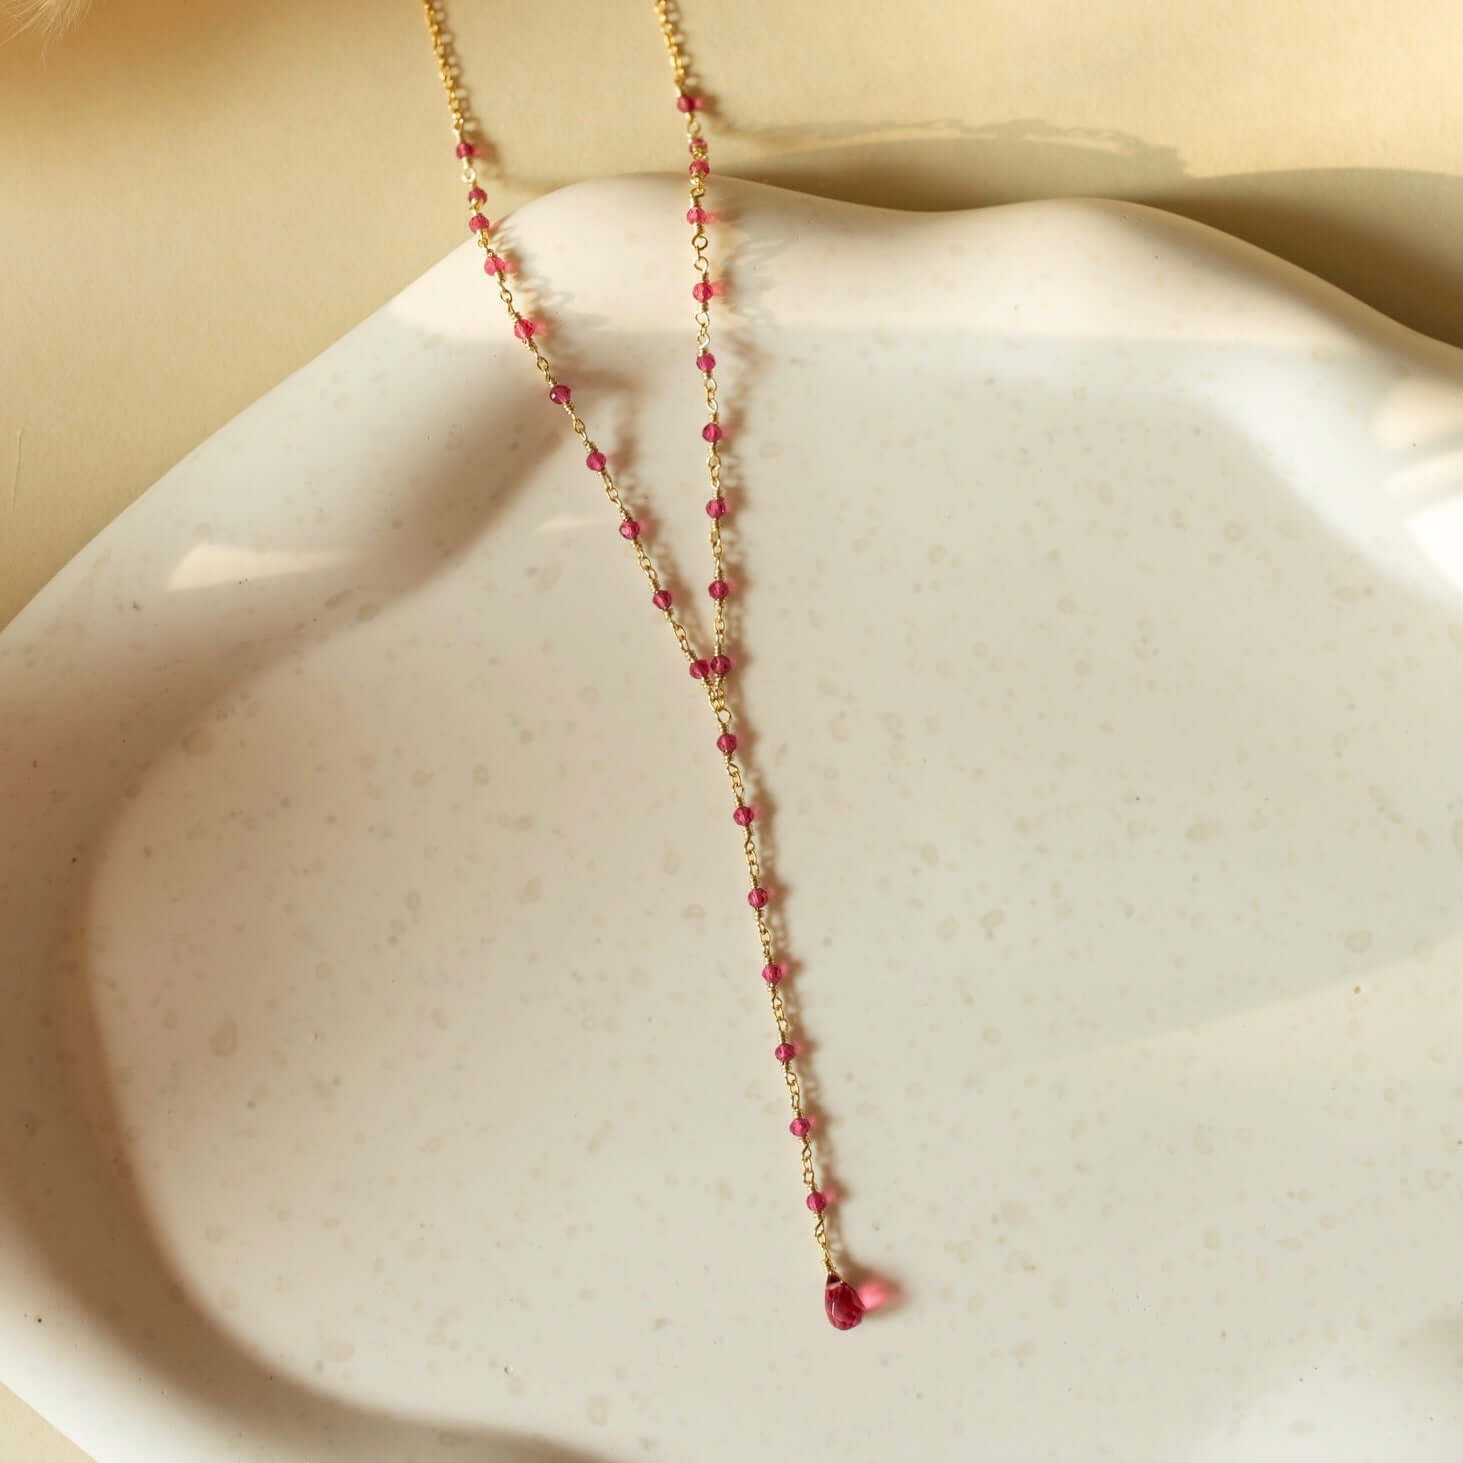 A pink tourmaline quartz necklace casually showcased on a clay plate—simply delightful.